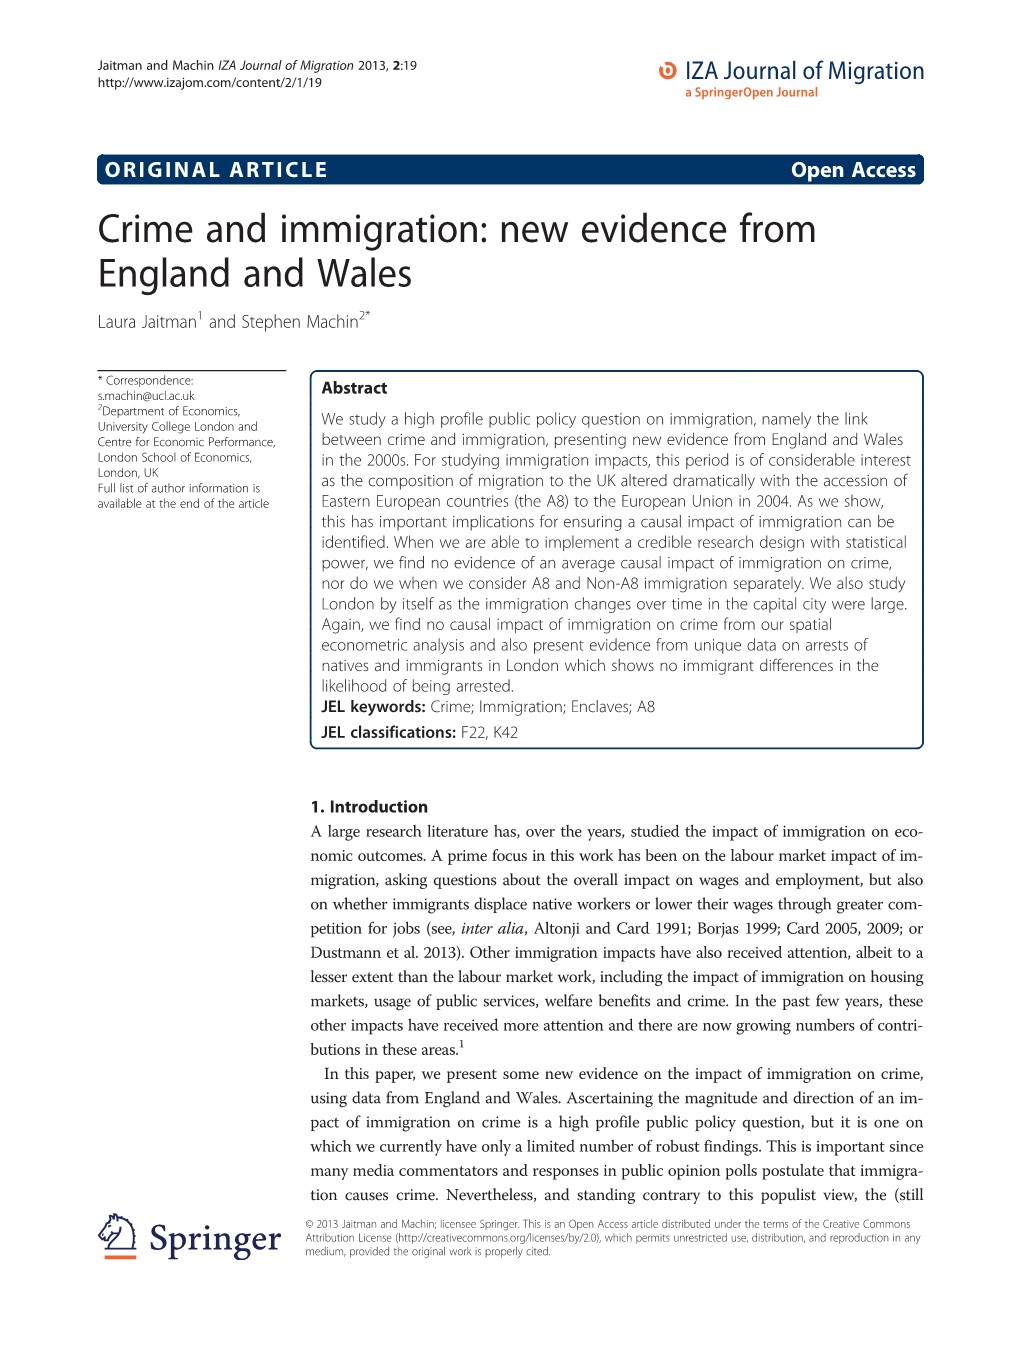 Crime and Immigration: New Evidence from England and Wales Laura Jaitman1 and Stephen Machin2*